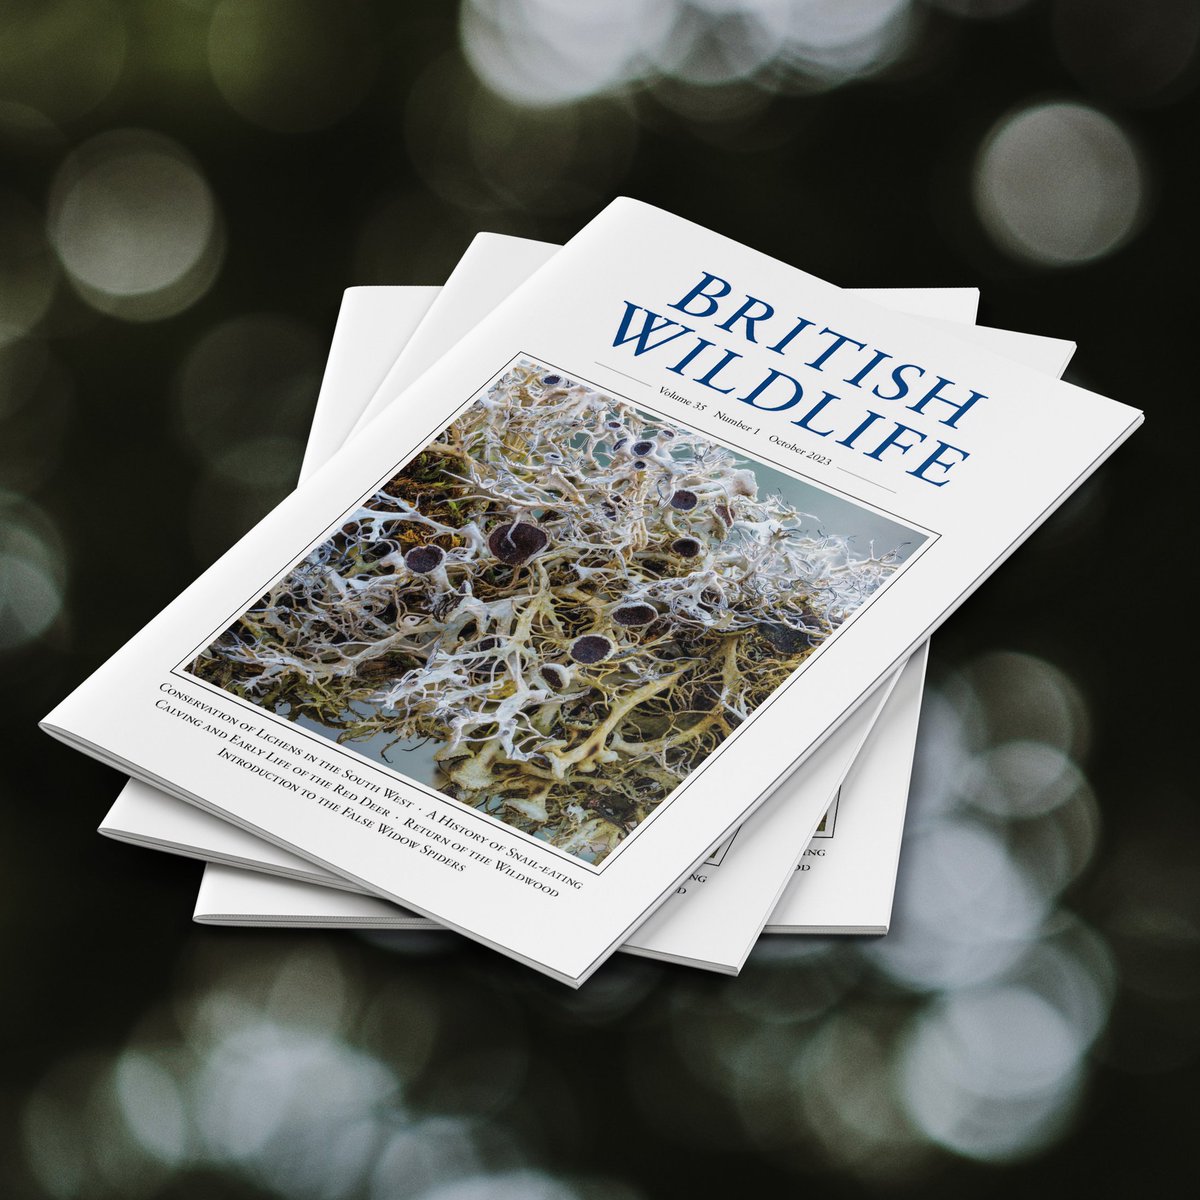 It's a privilege to join the new team of columnists writing for @britwildlife Tough shoes to fill since @suesustainable 's departure but we'll do our best! Latest edition now available: britishwildlife.com